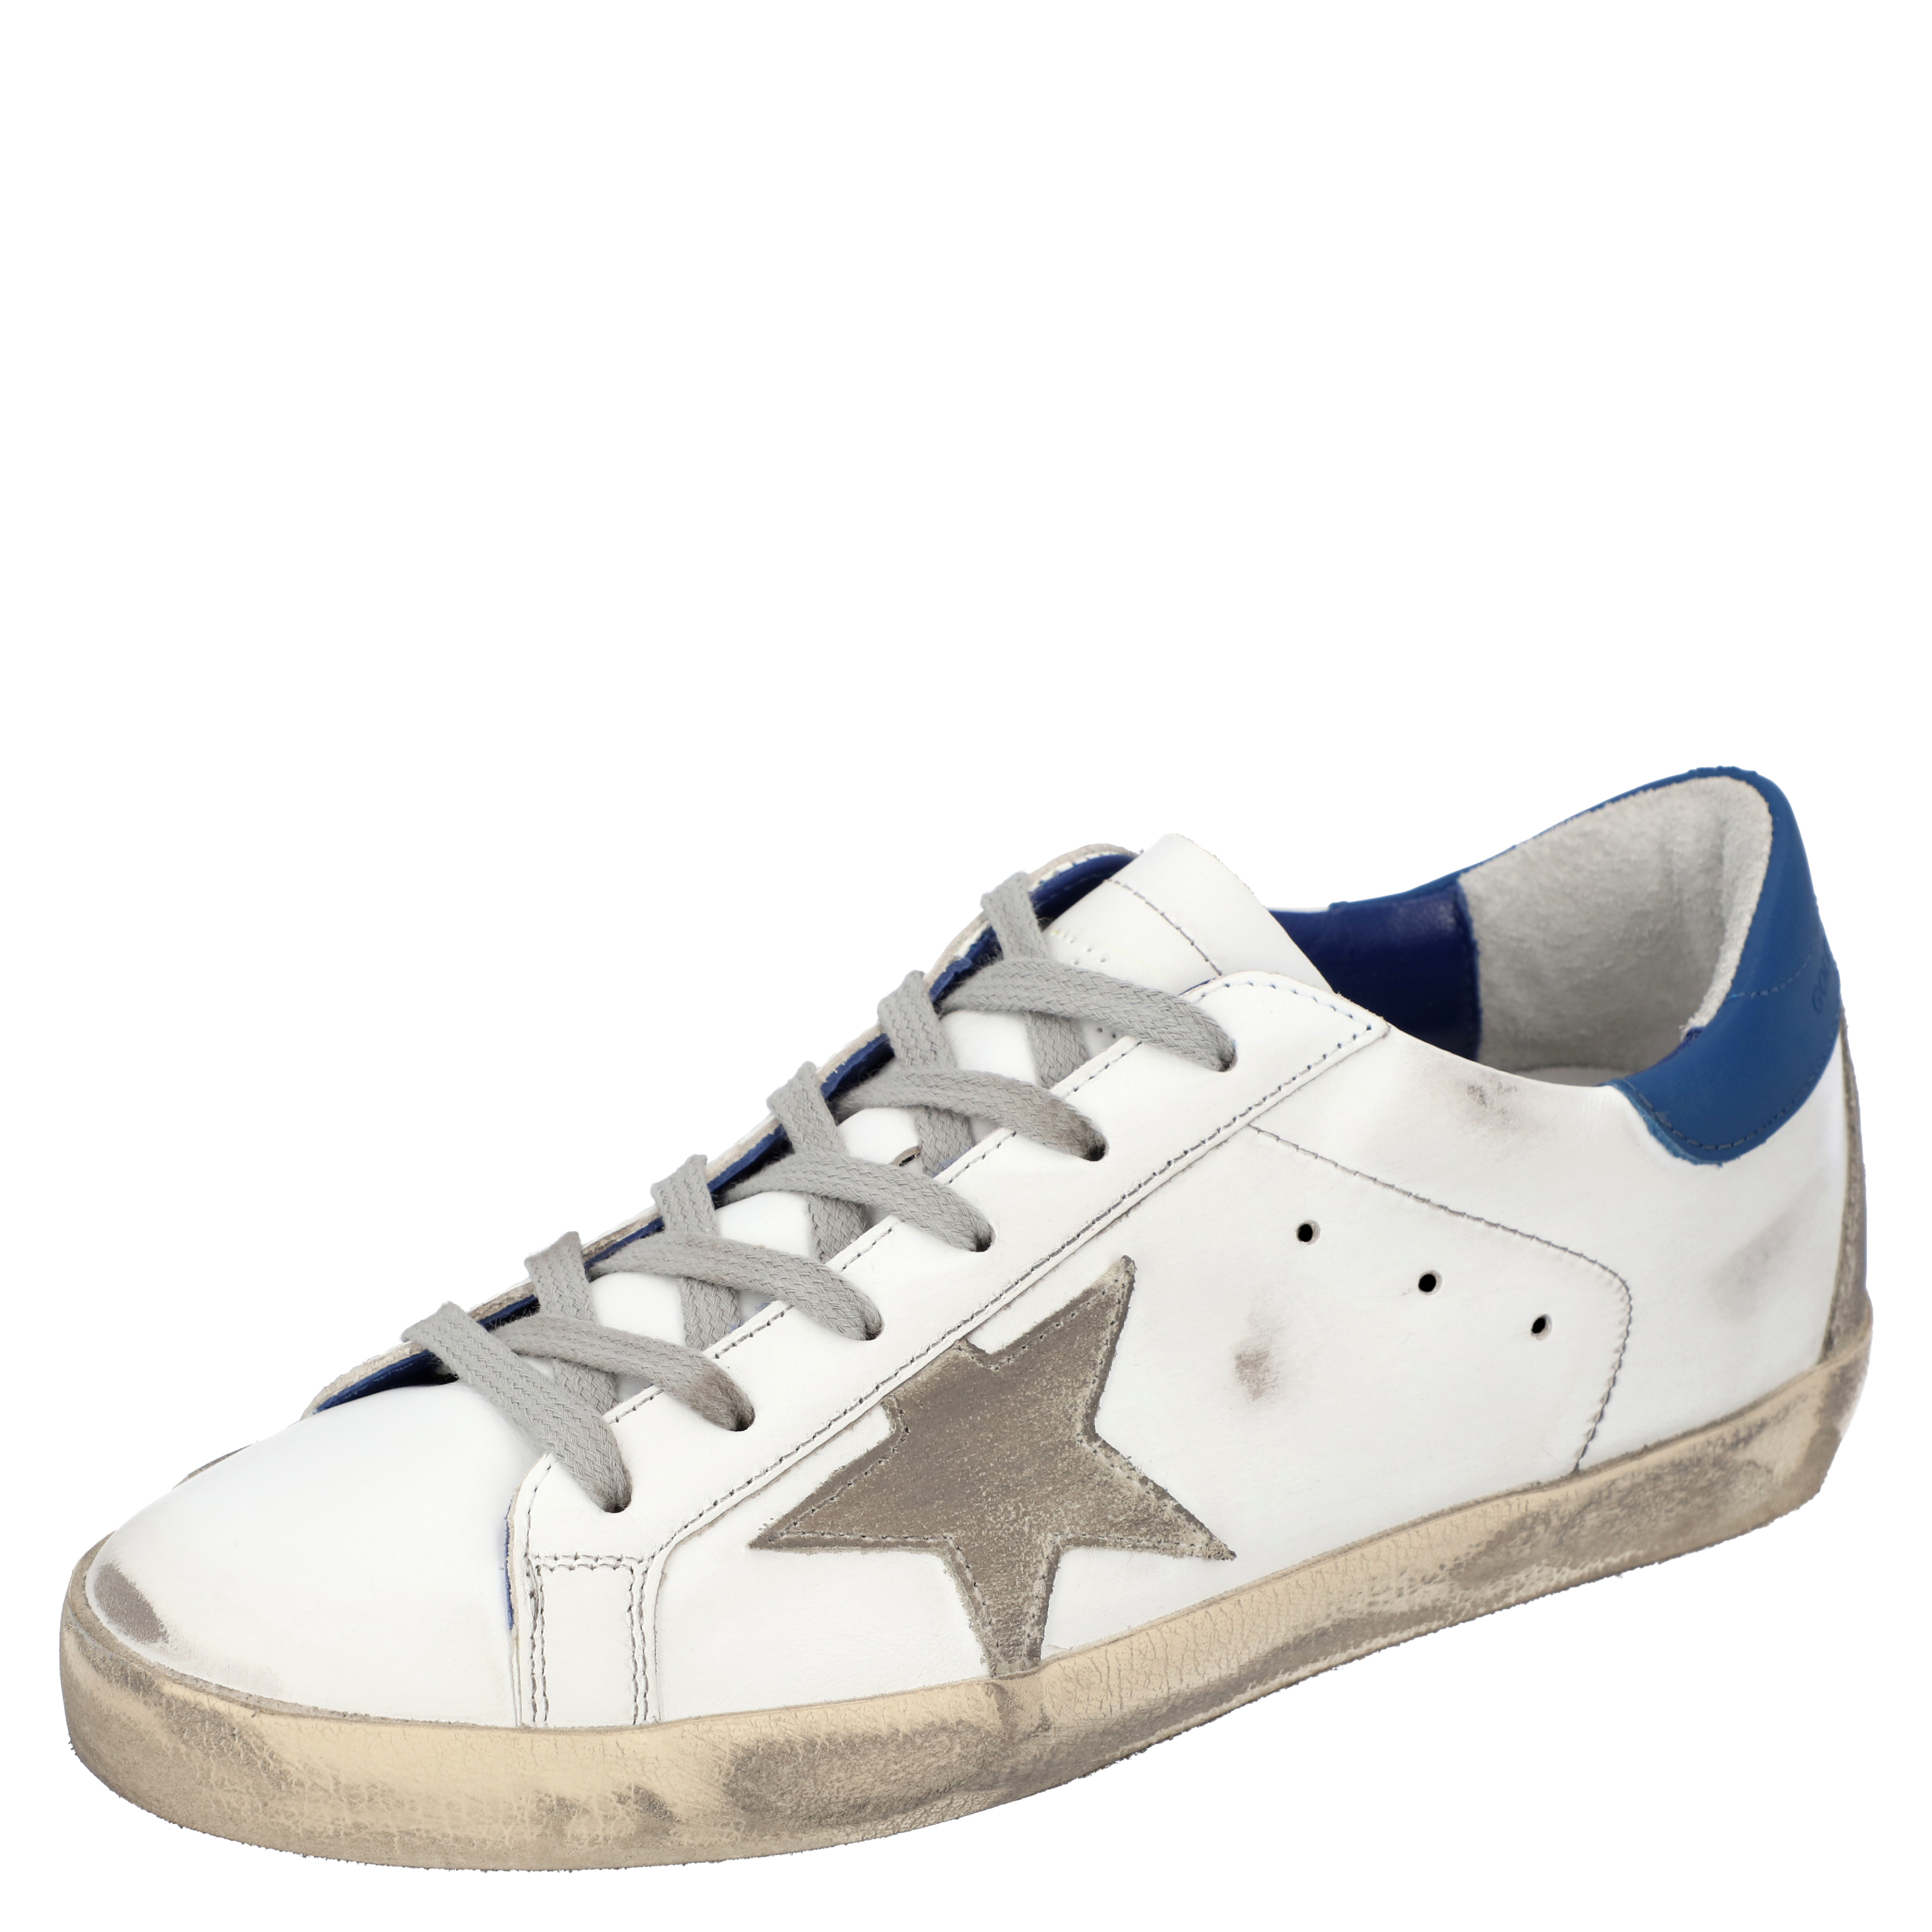 Golden Goose White/Blue Leather Superstar Sneakers Size EU 36